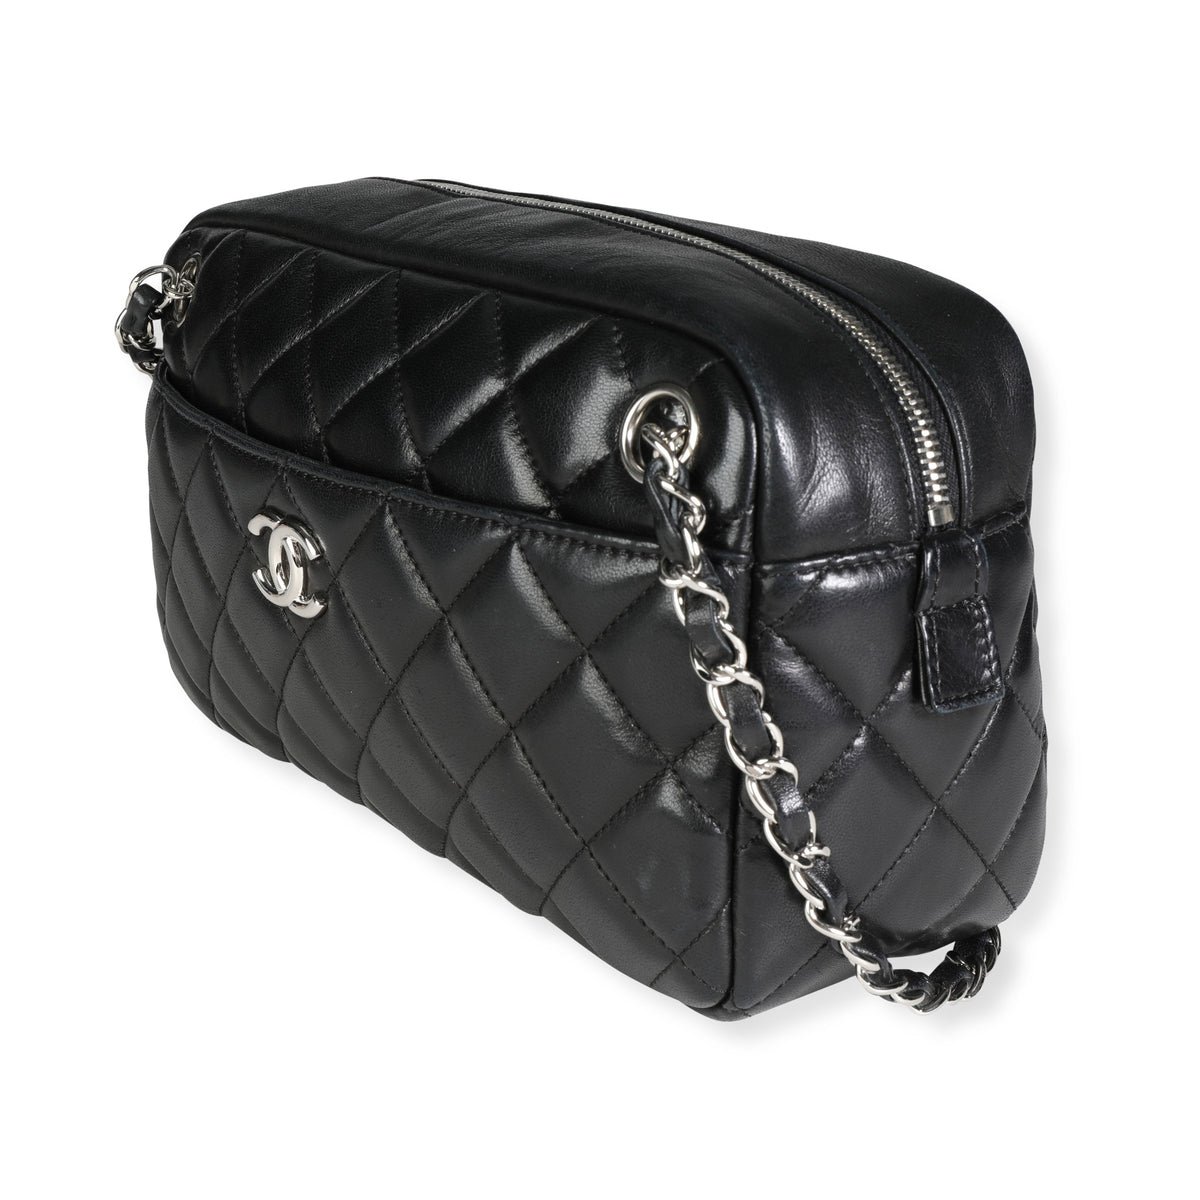 Chanel Black Quilted Lambskin Classic Camera Case, myGemma